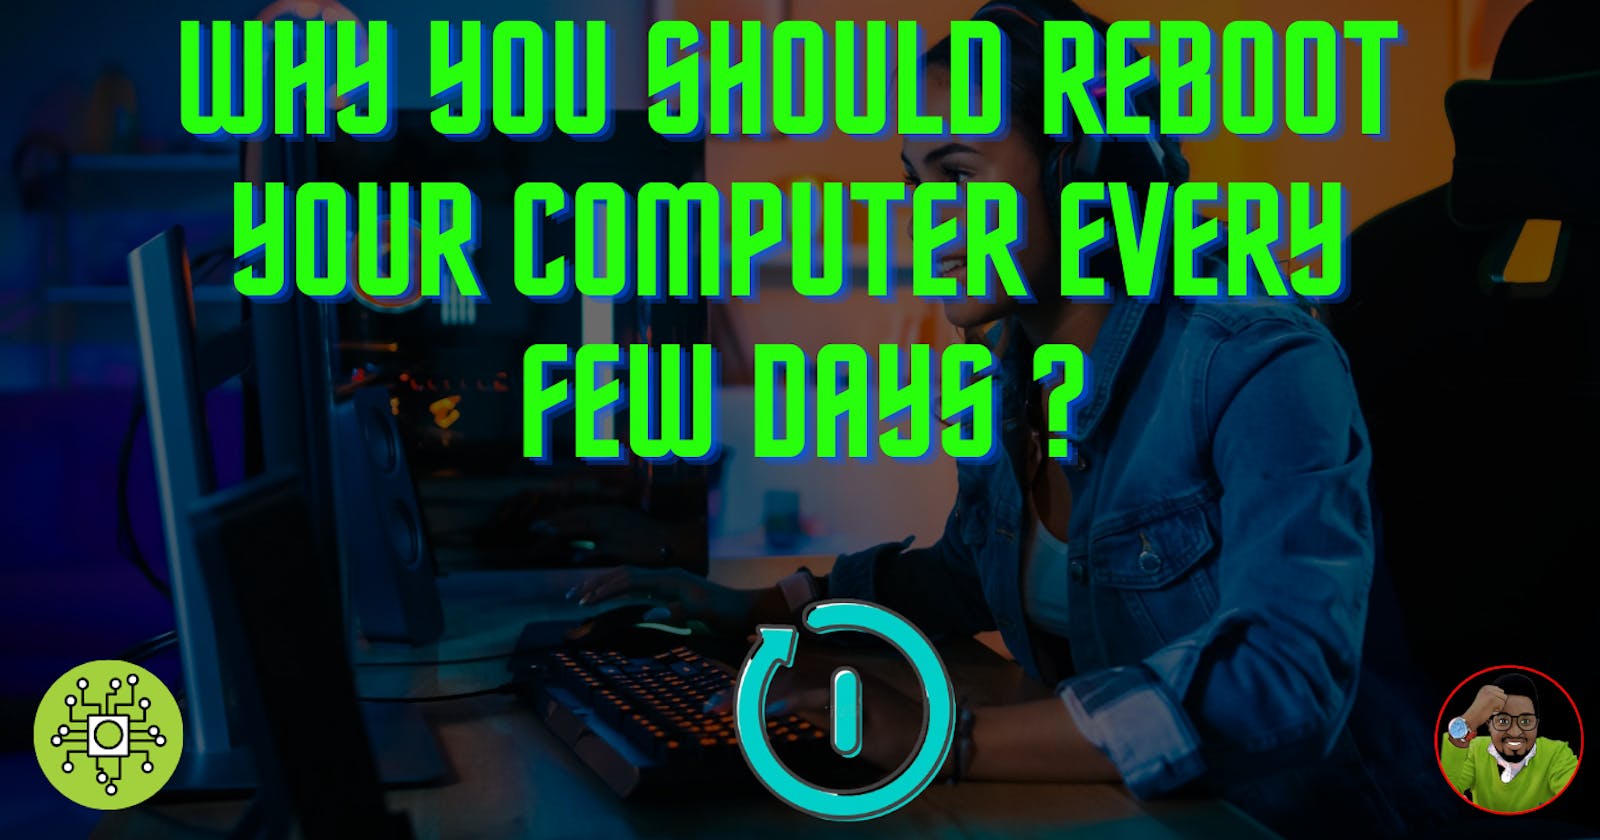 Why You Should Reboot Your Computer Every Few Days